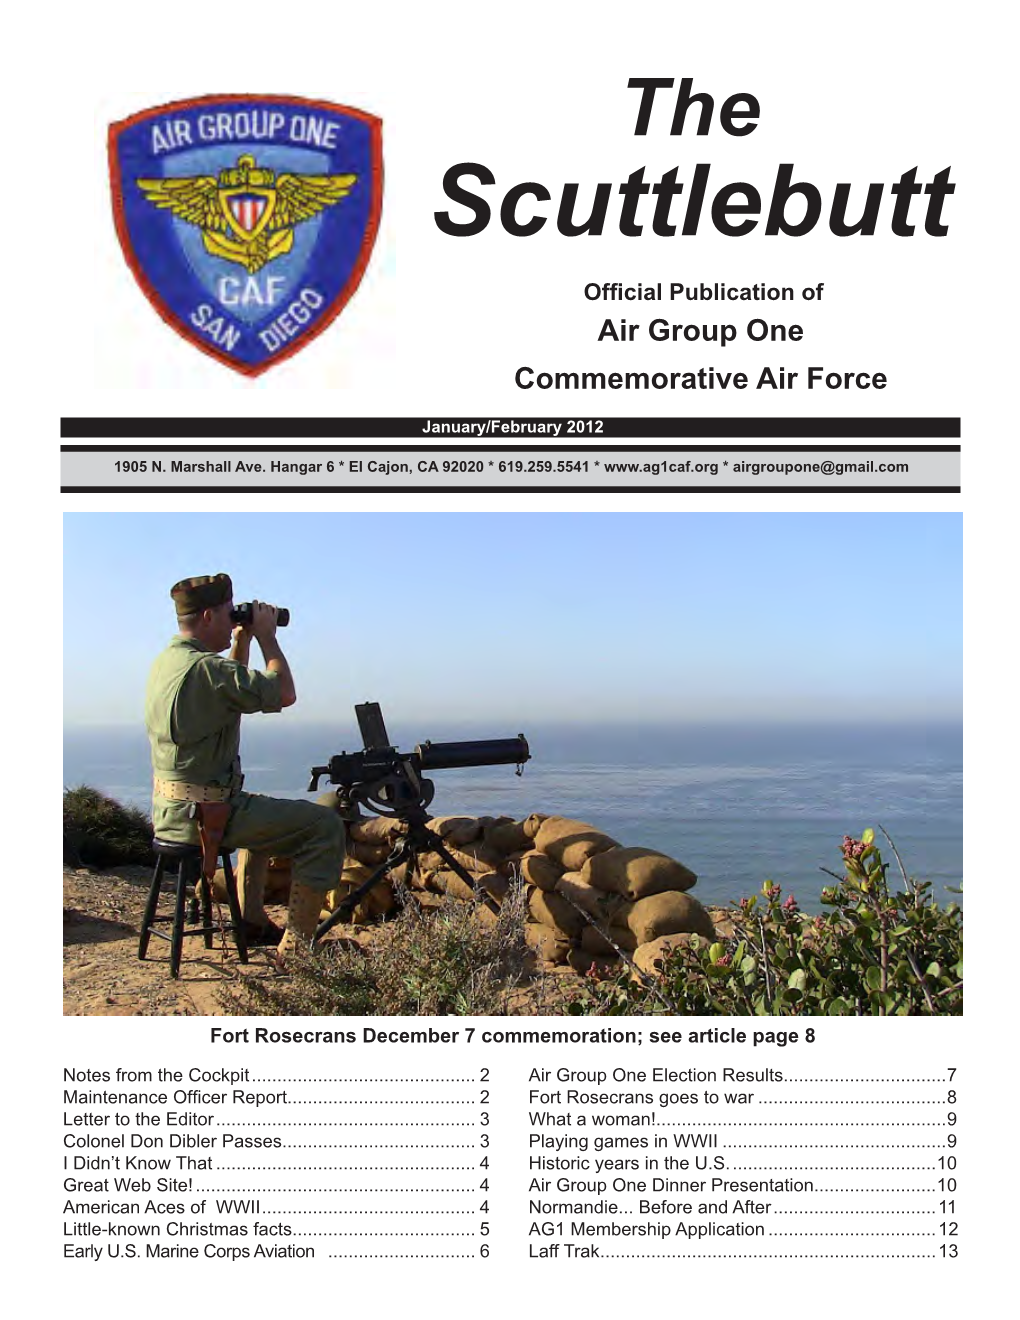 Scuttlebutt Official Publication of Air Group One Commemorative Air Force